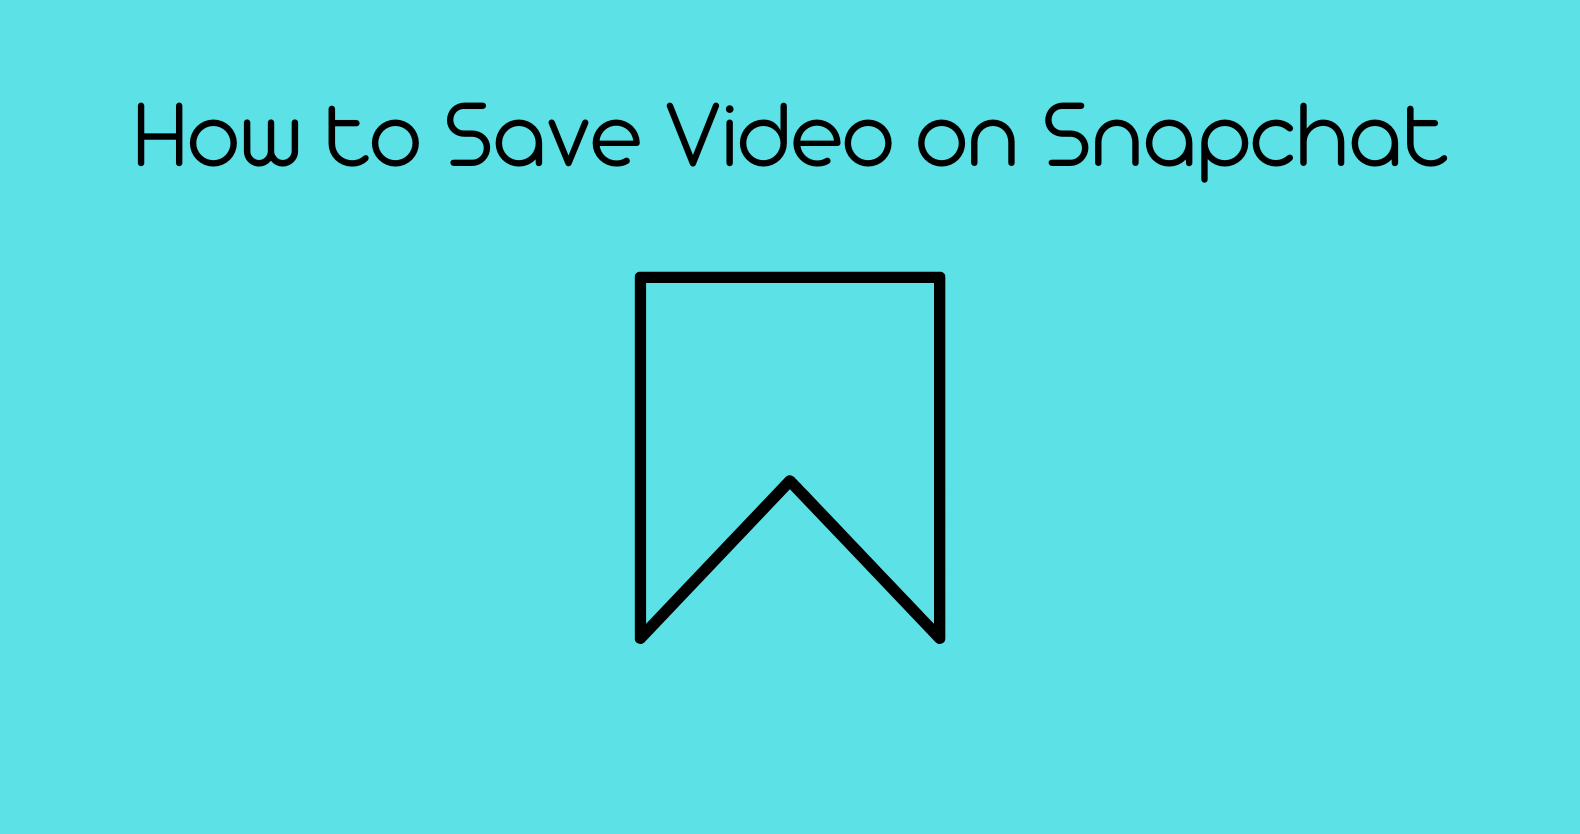 How to Save Video on Snapchat